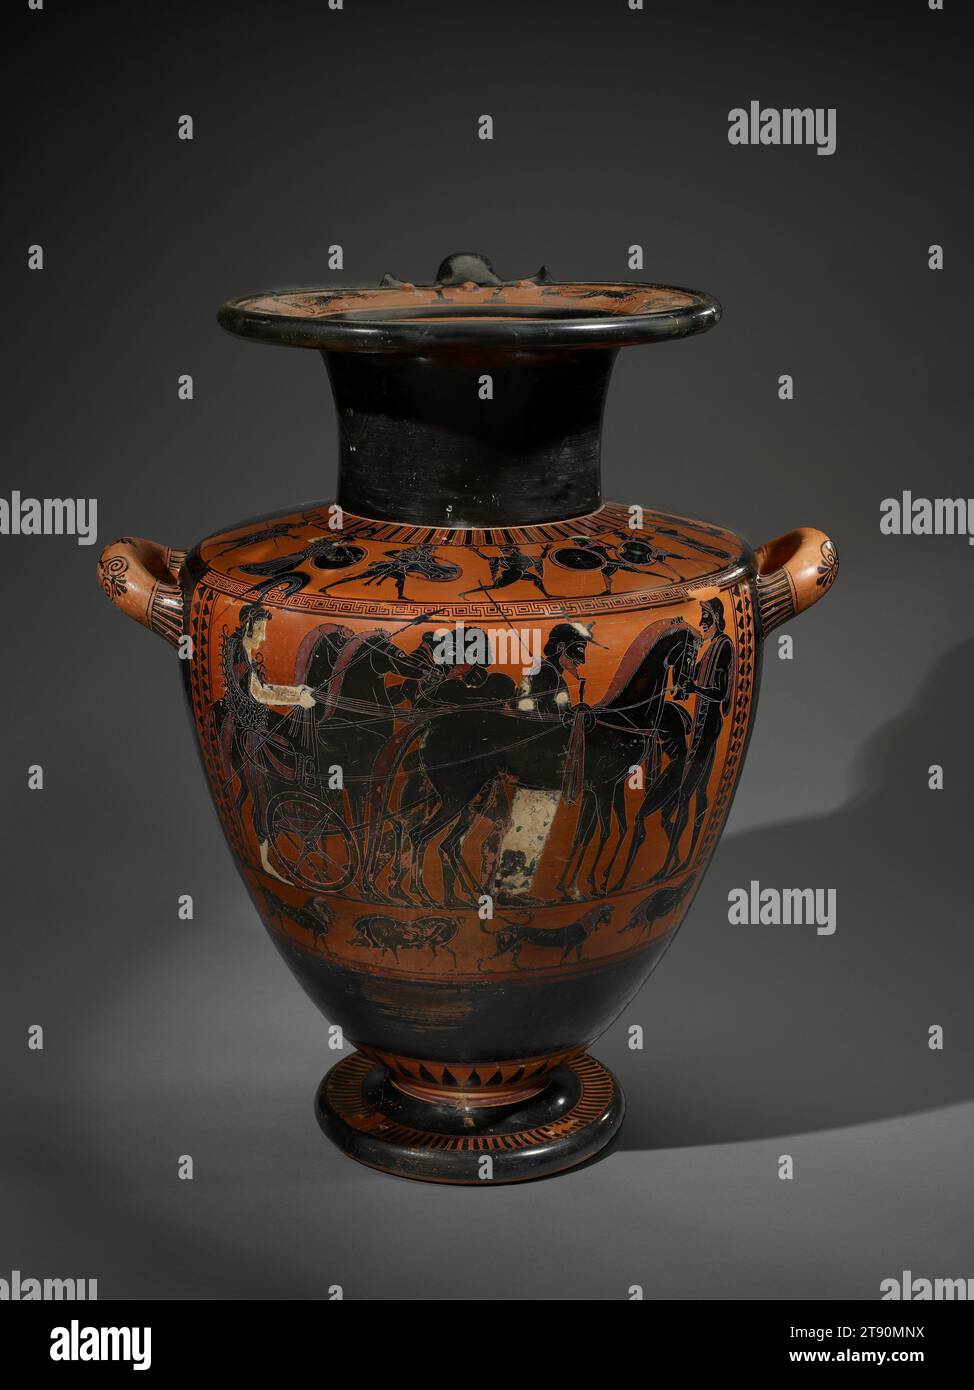 Black-figured Hydria, c. 530 BCE, Attributed to the Antimenes Painter, Greek, (Attica), 20 3/4 x 17 x 15 in. (52.71 x 43.18 x 38.1 cm), Slip-glazed earthenware, Greece, 6th–5th century BCE, The Antimenes Painter decorated many hydriae--three-handled water jars--of the sort seen here. In the main scene the goddess Athena, painted white to indicate her gender, helps harness her four-horse chariot, assisted by several grooms and the bearded charioteer. This harnessing technique accurately reflects sixth-century b.c. practices. The appearance of Athena dressed for war Stock Photo